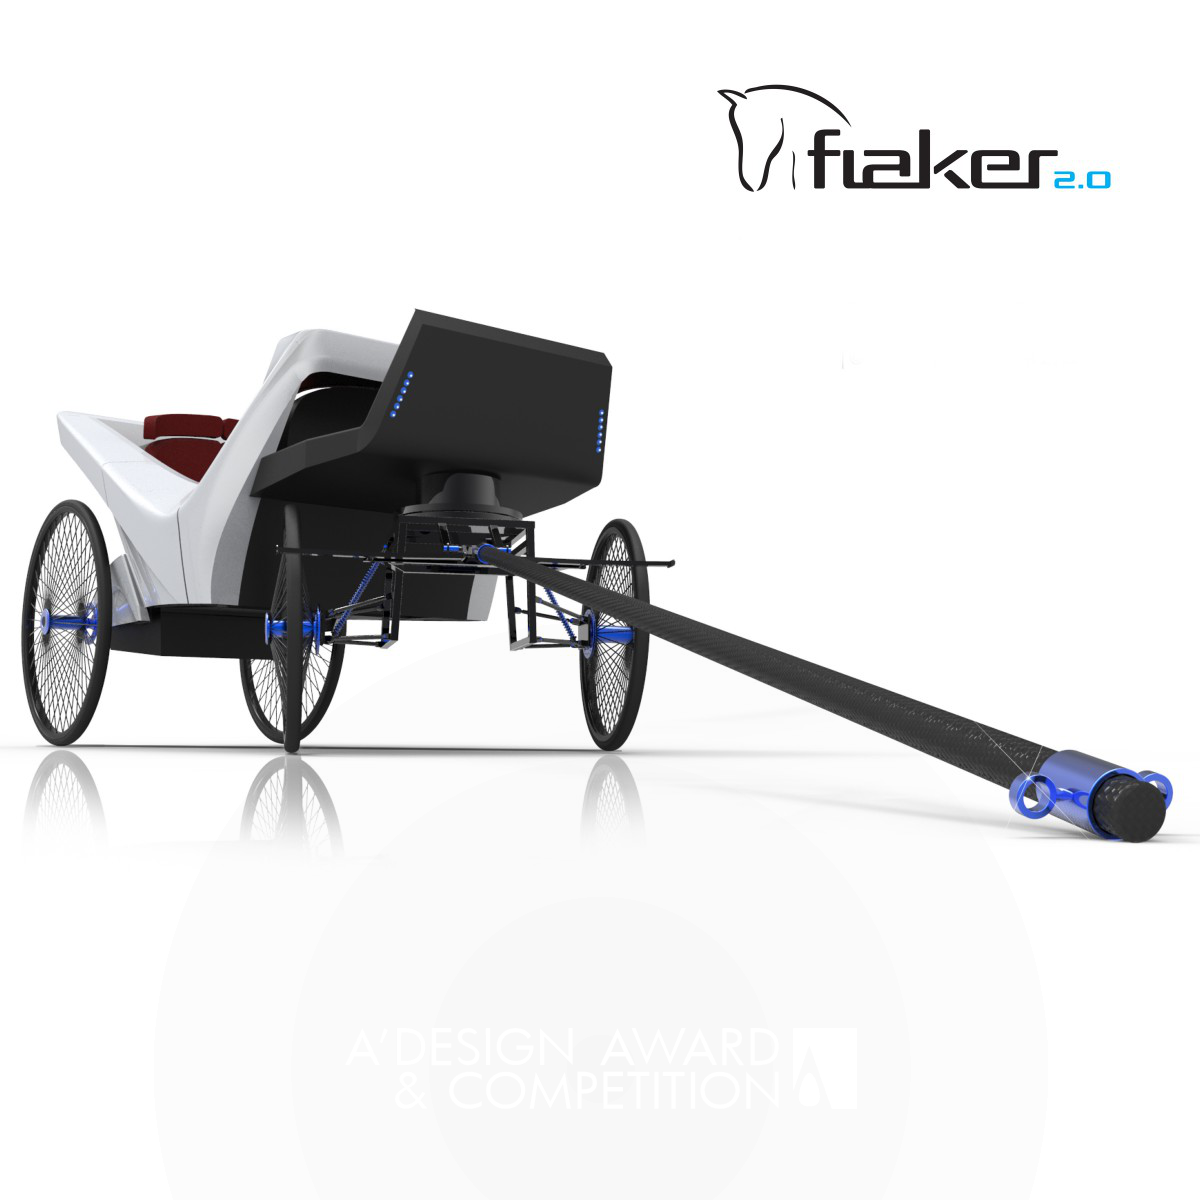 Fiaker 2.0 advanced carriage by Michael Hofbauer